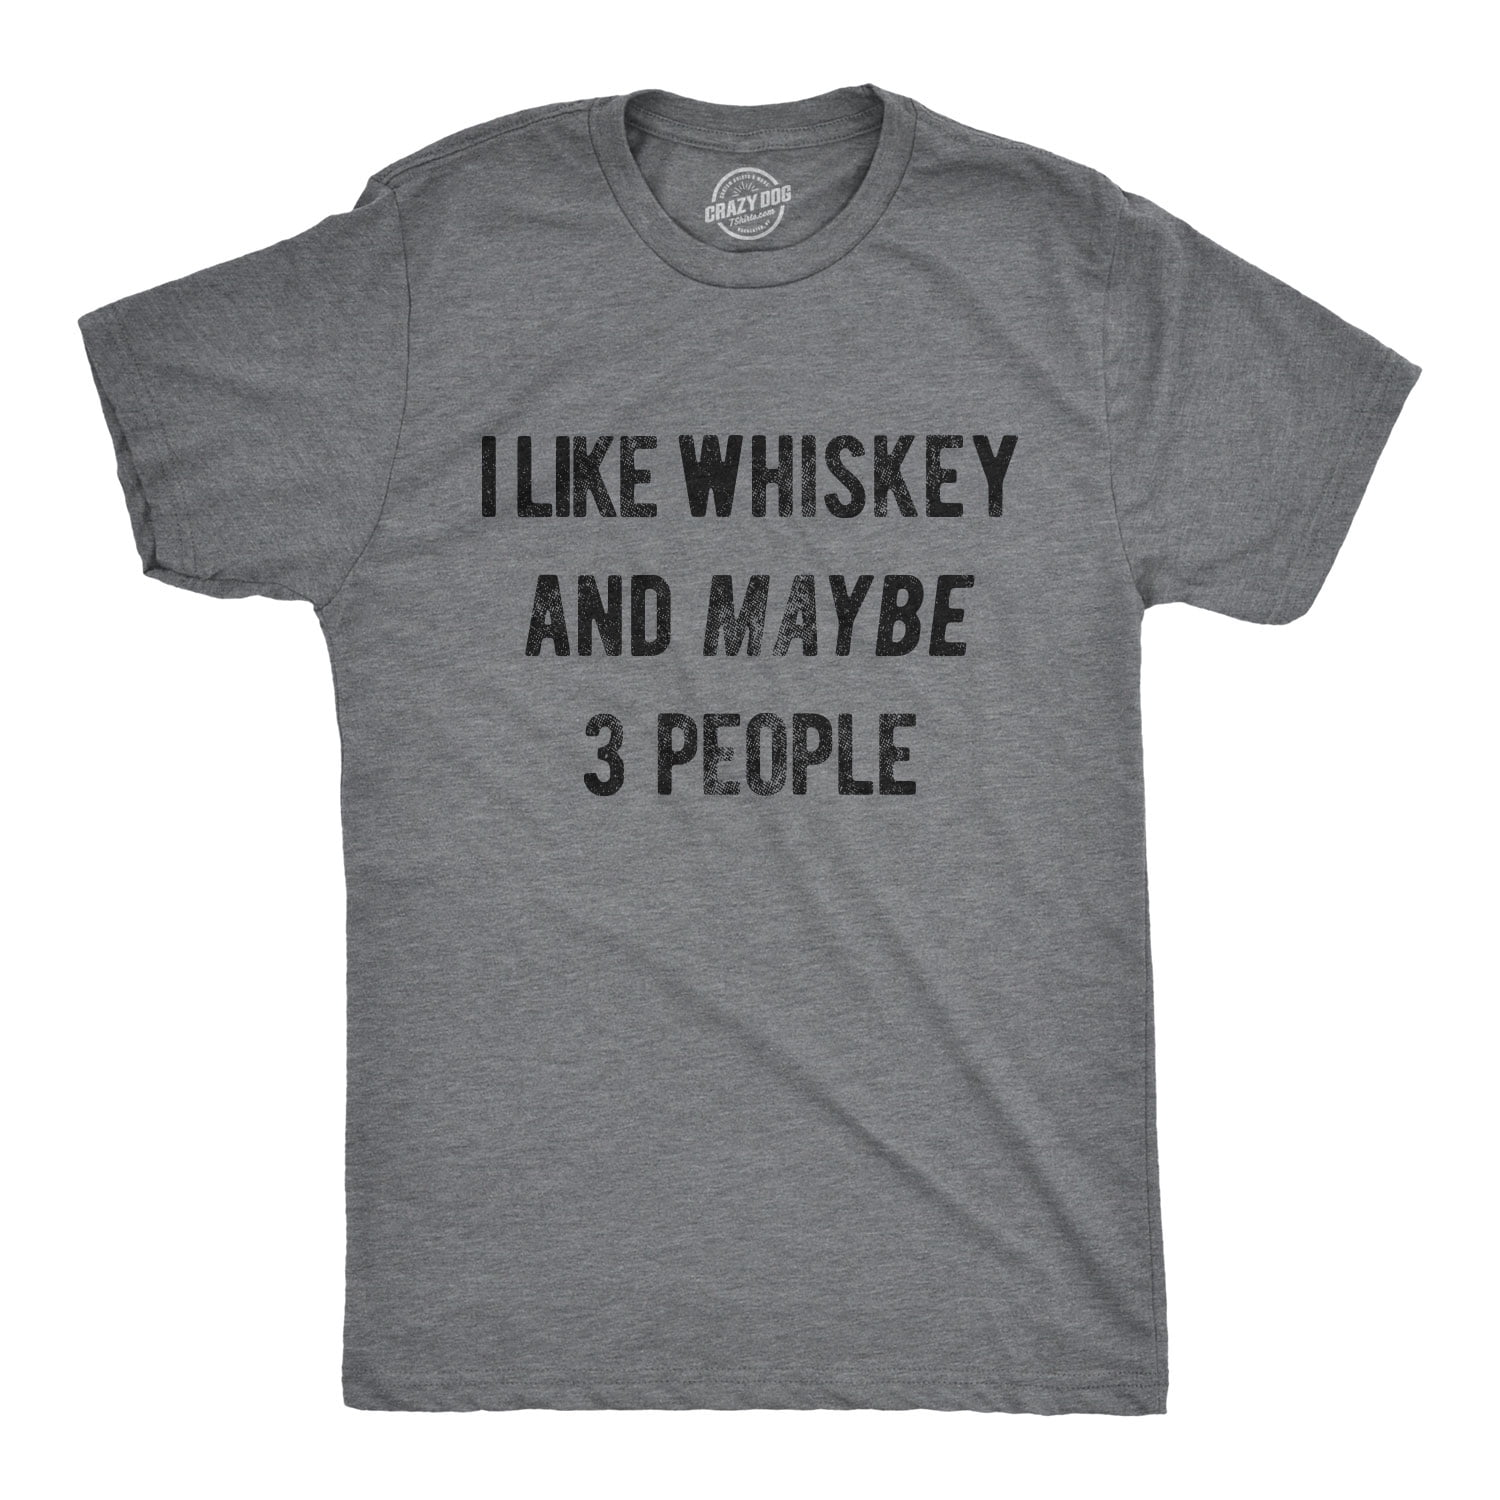 Whiskey Lover\u2019s Gifts Sarcastic Whiskey shirt Funny Drinking Shirts Funny Whiskey Tee Women\u2019s Tees Will Run for Whiskey